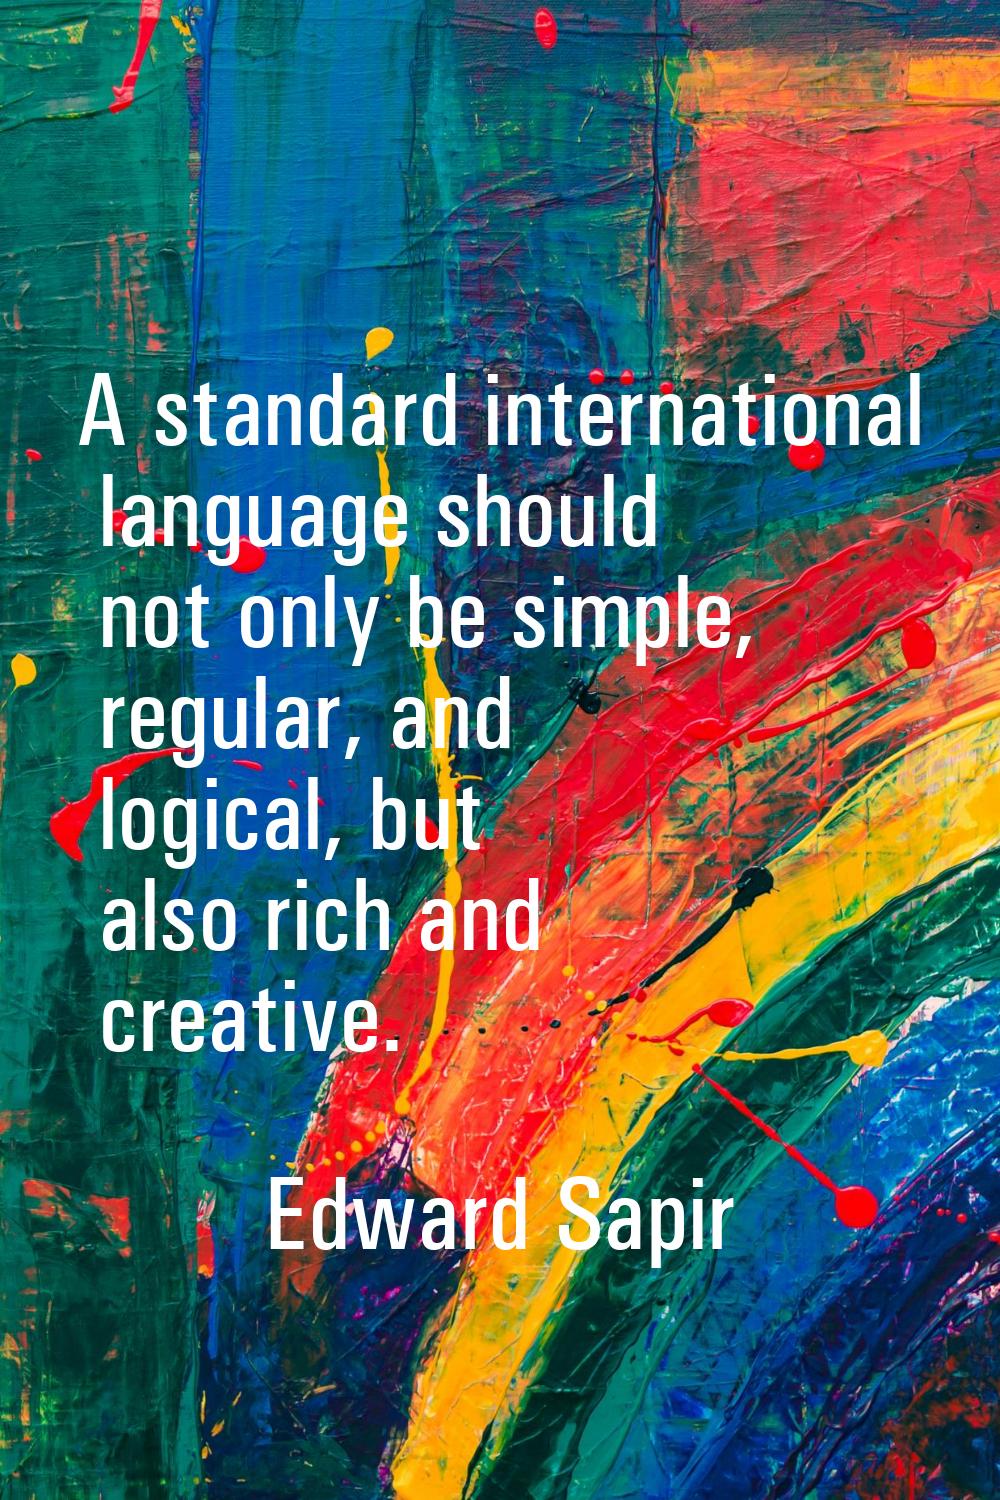 A standard international language should not only be simple, regular, and logical, but also rich an